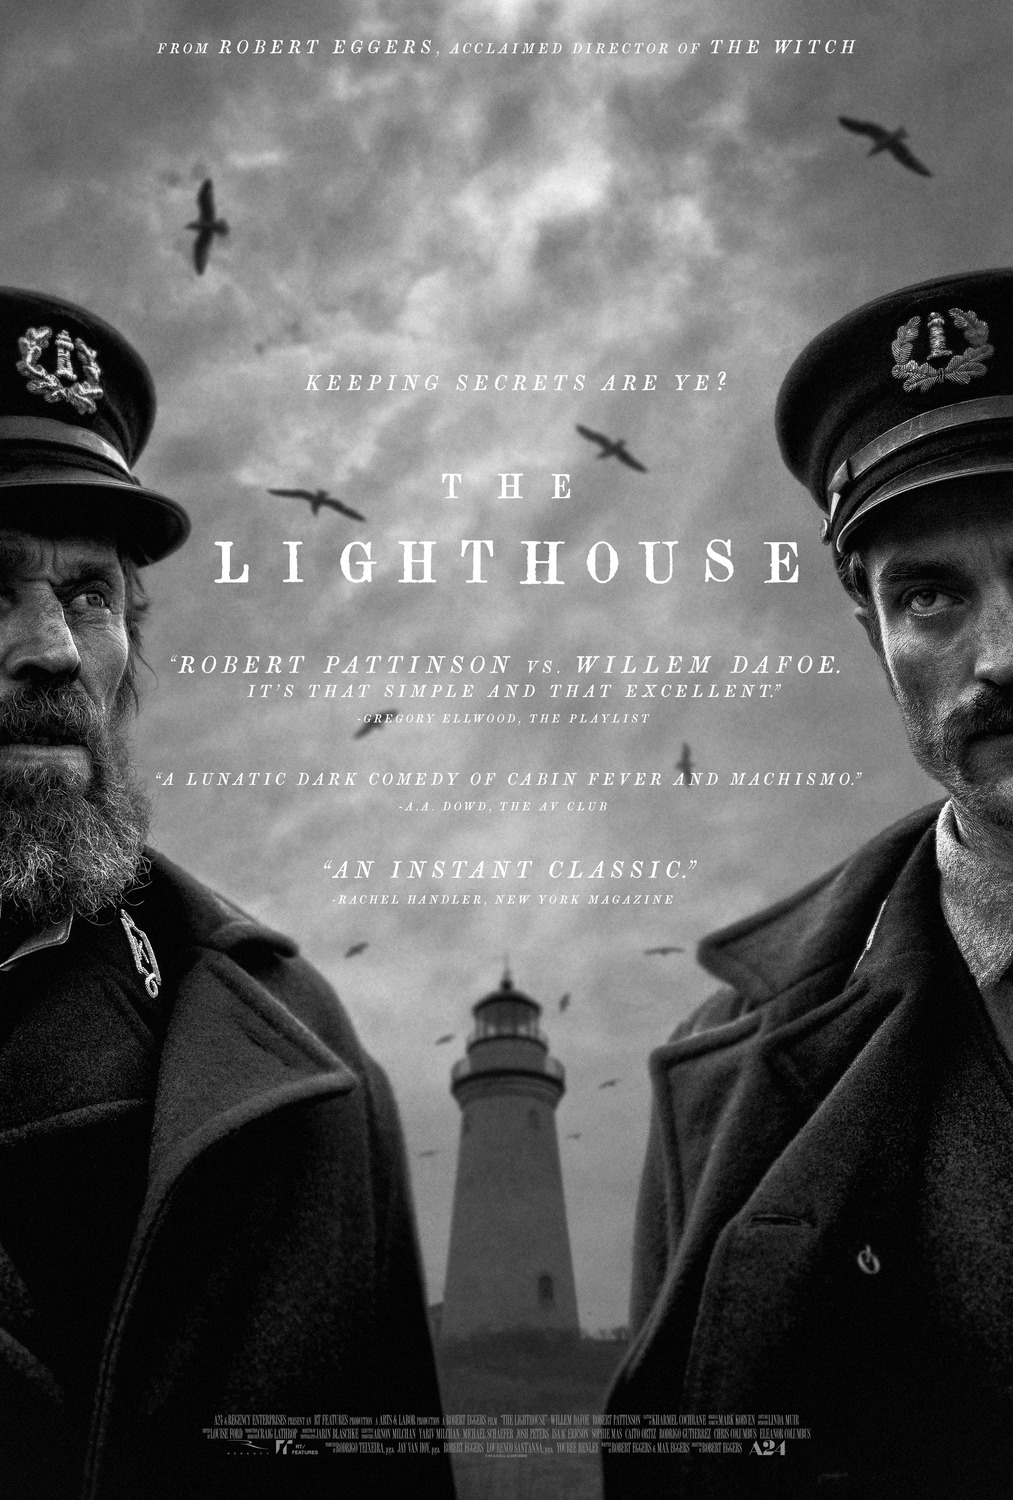 The lighthouse [DVD] (2019).  Directed by Robert Eggers.